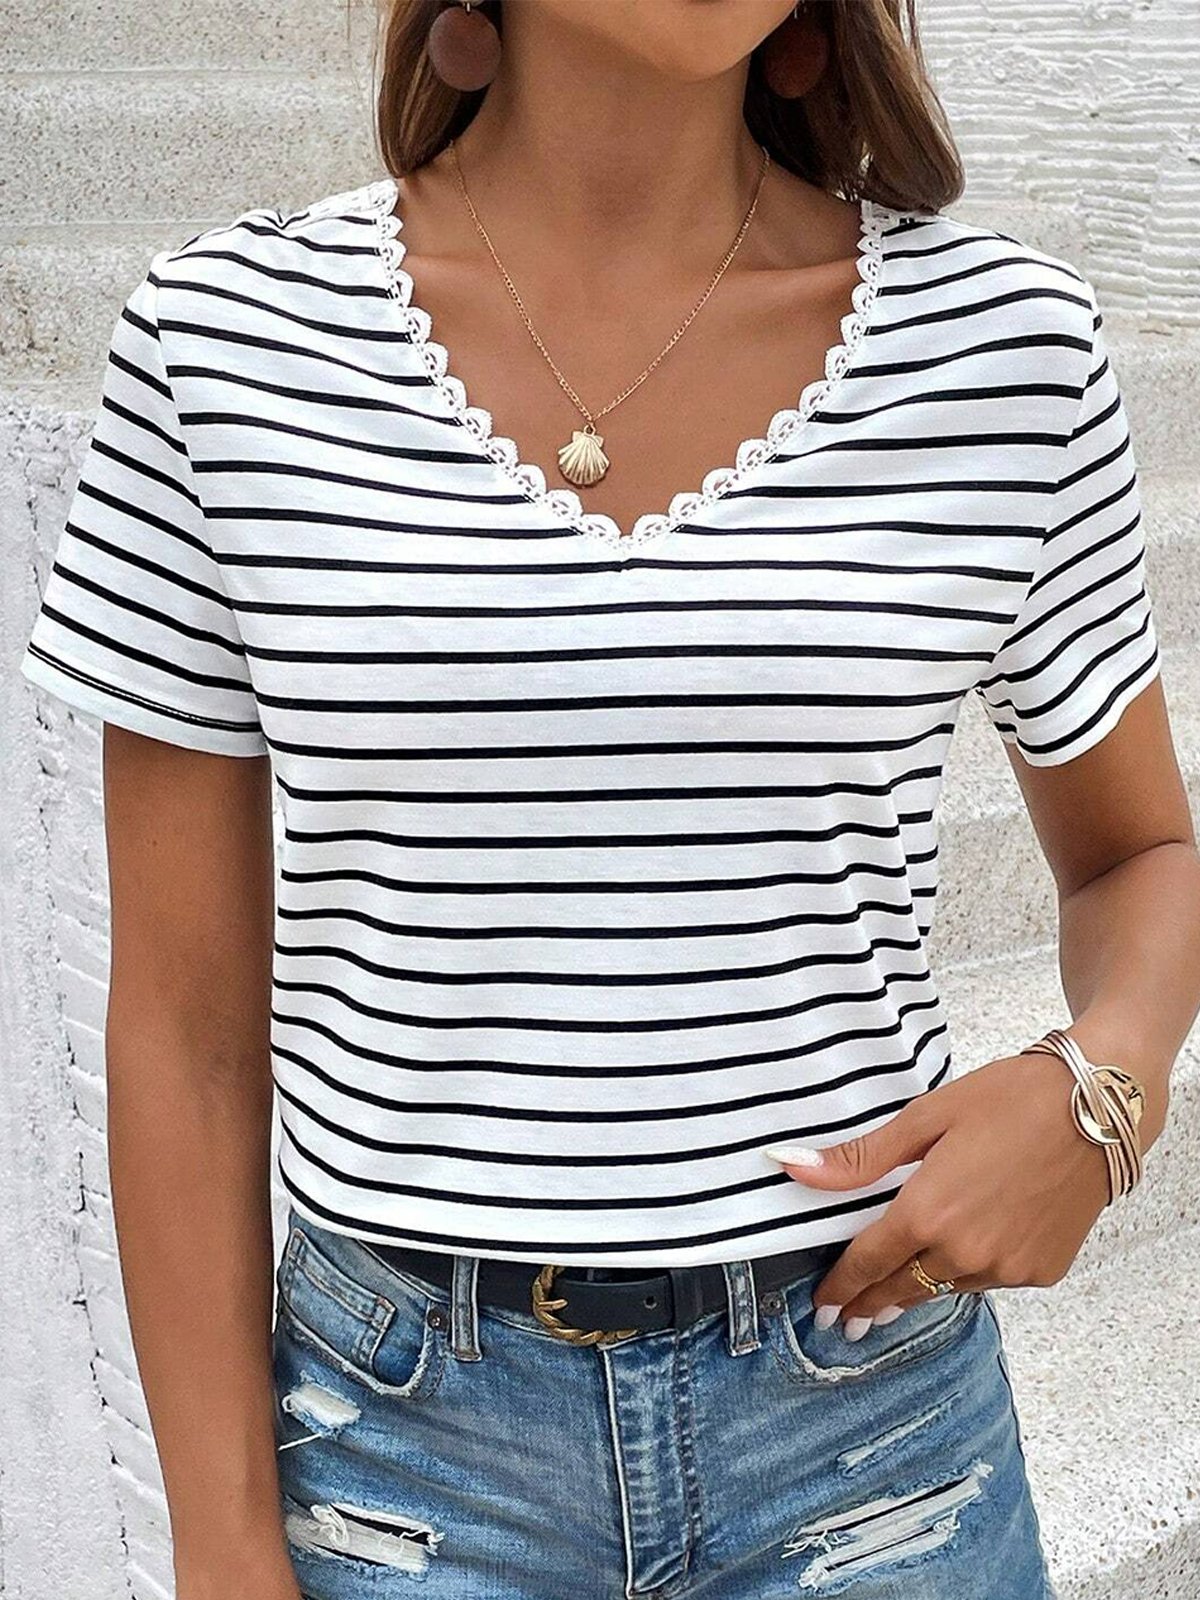 Women's Short Sleeve Tee Summer Striped Lace Hollow out V Neck Going Out Elegant Top White Red